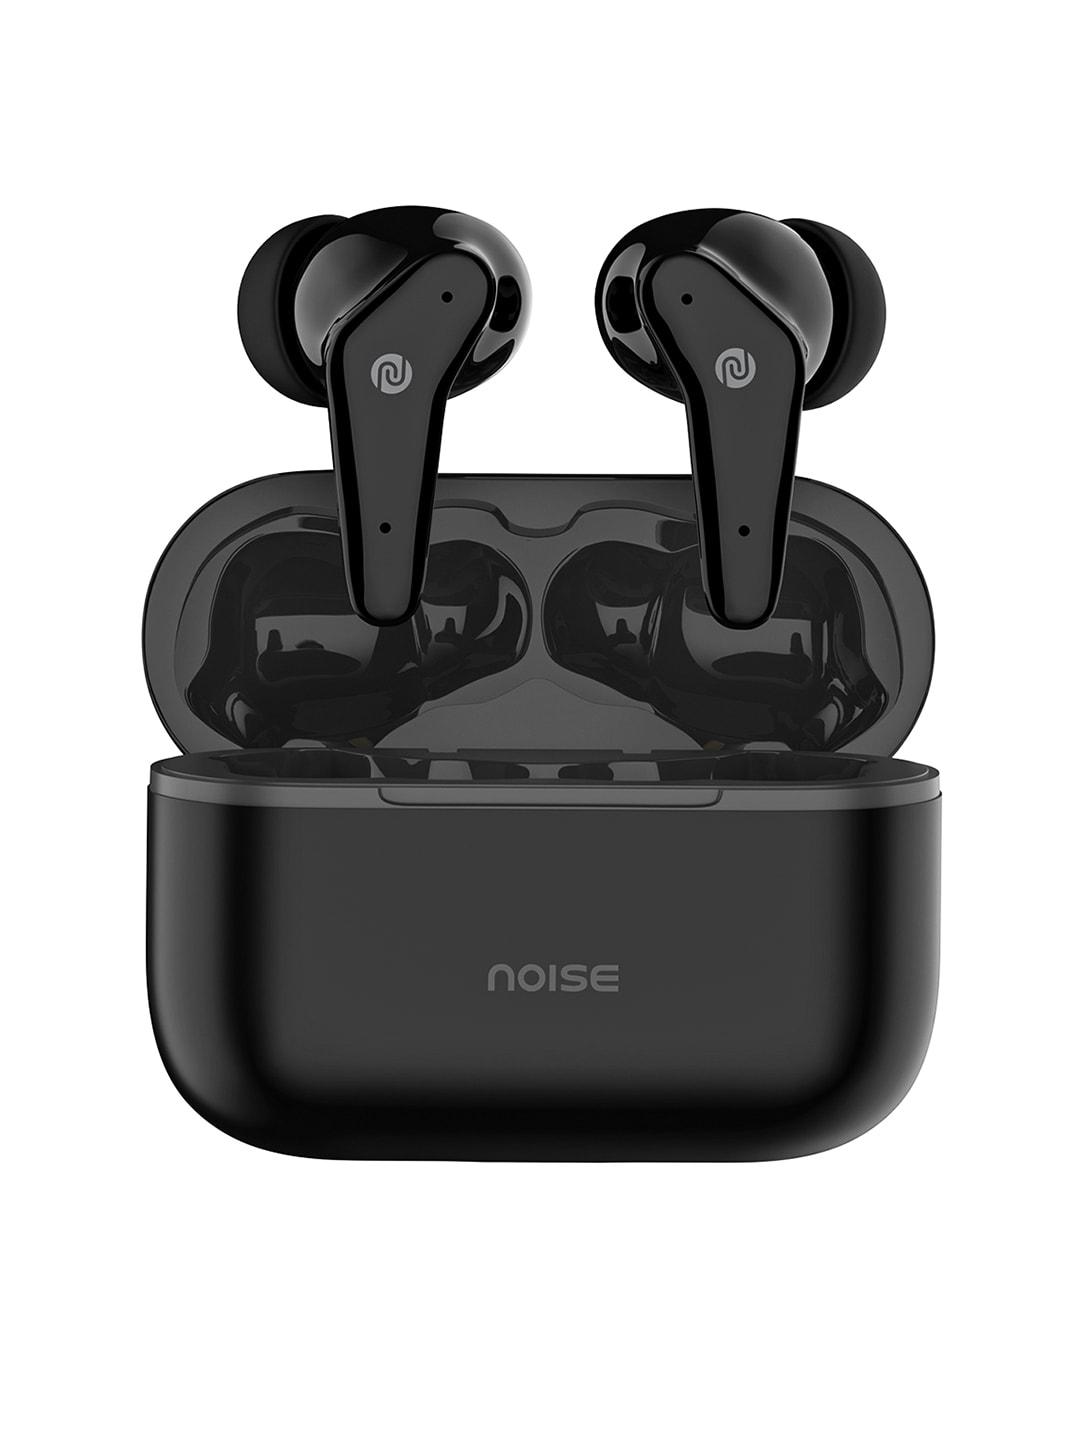 noise-buds-vs102-truly-wireless-earbuds-with-50hrs-playtime-and-11mm-driver